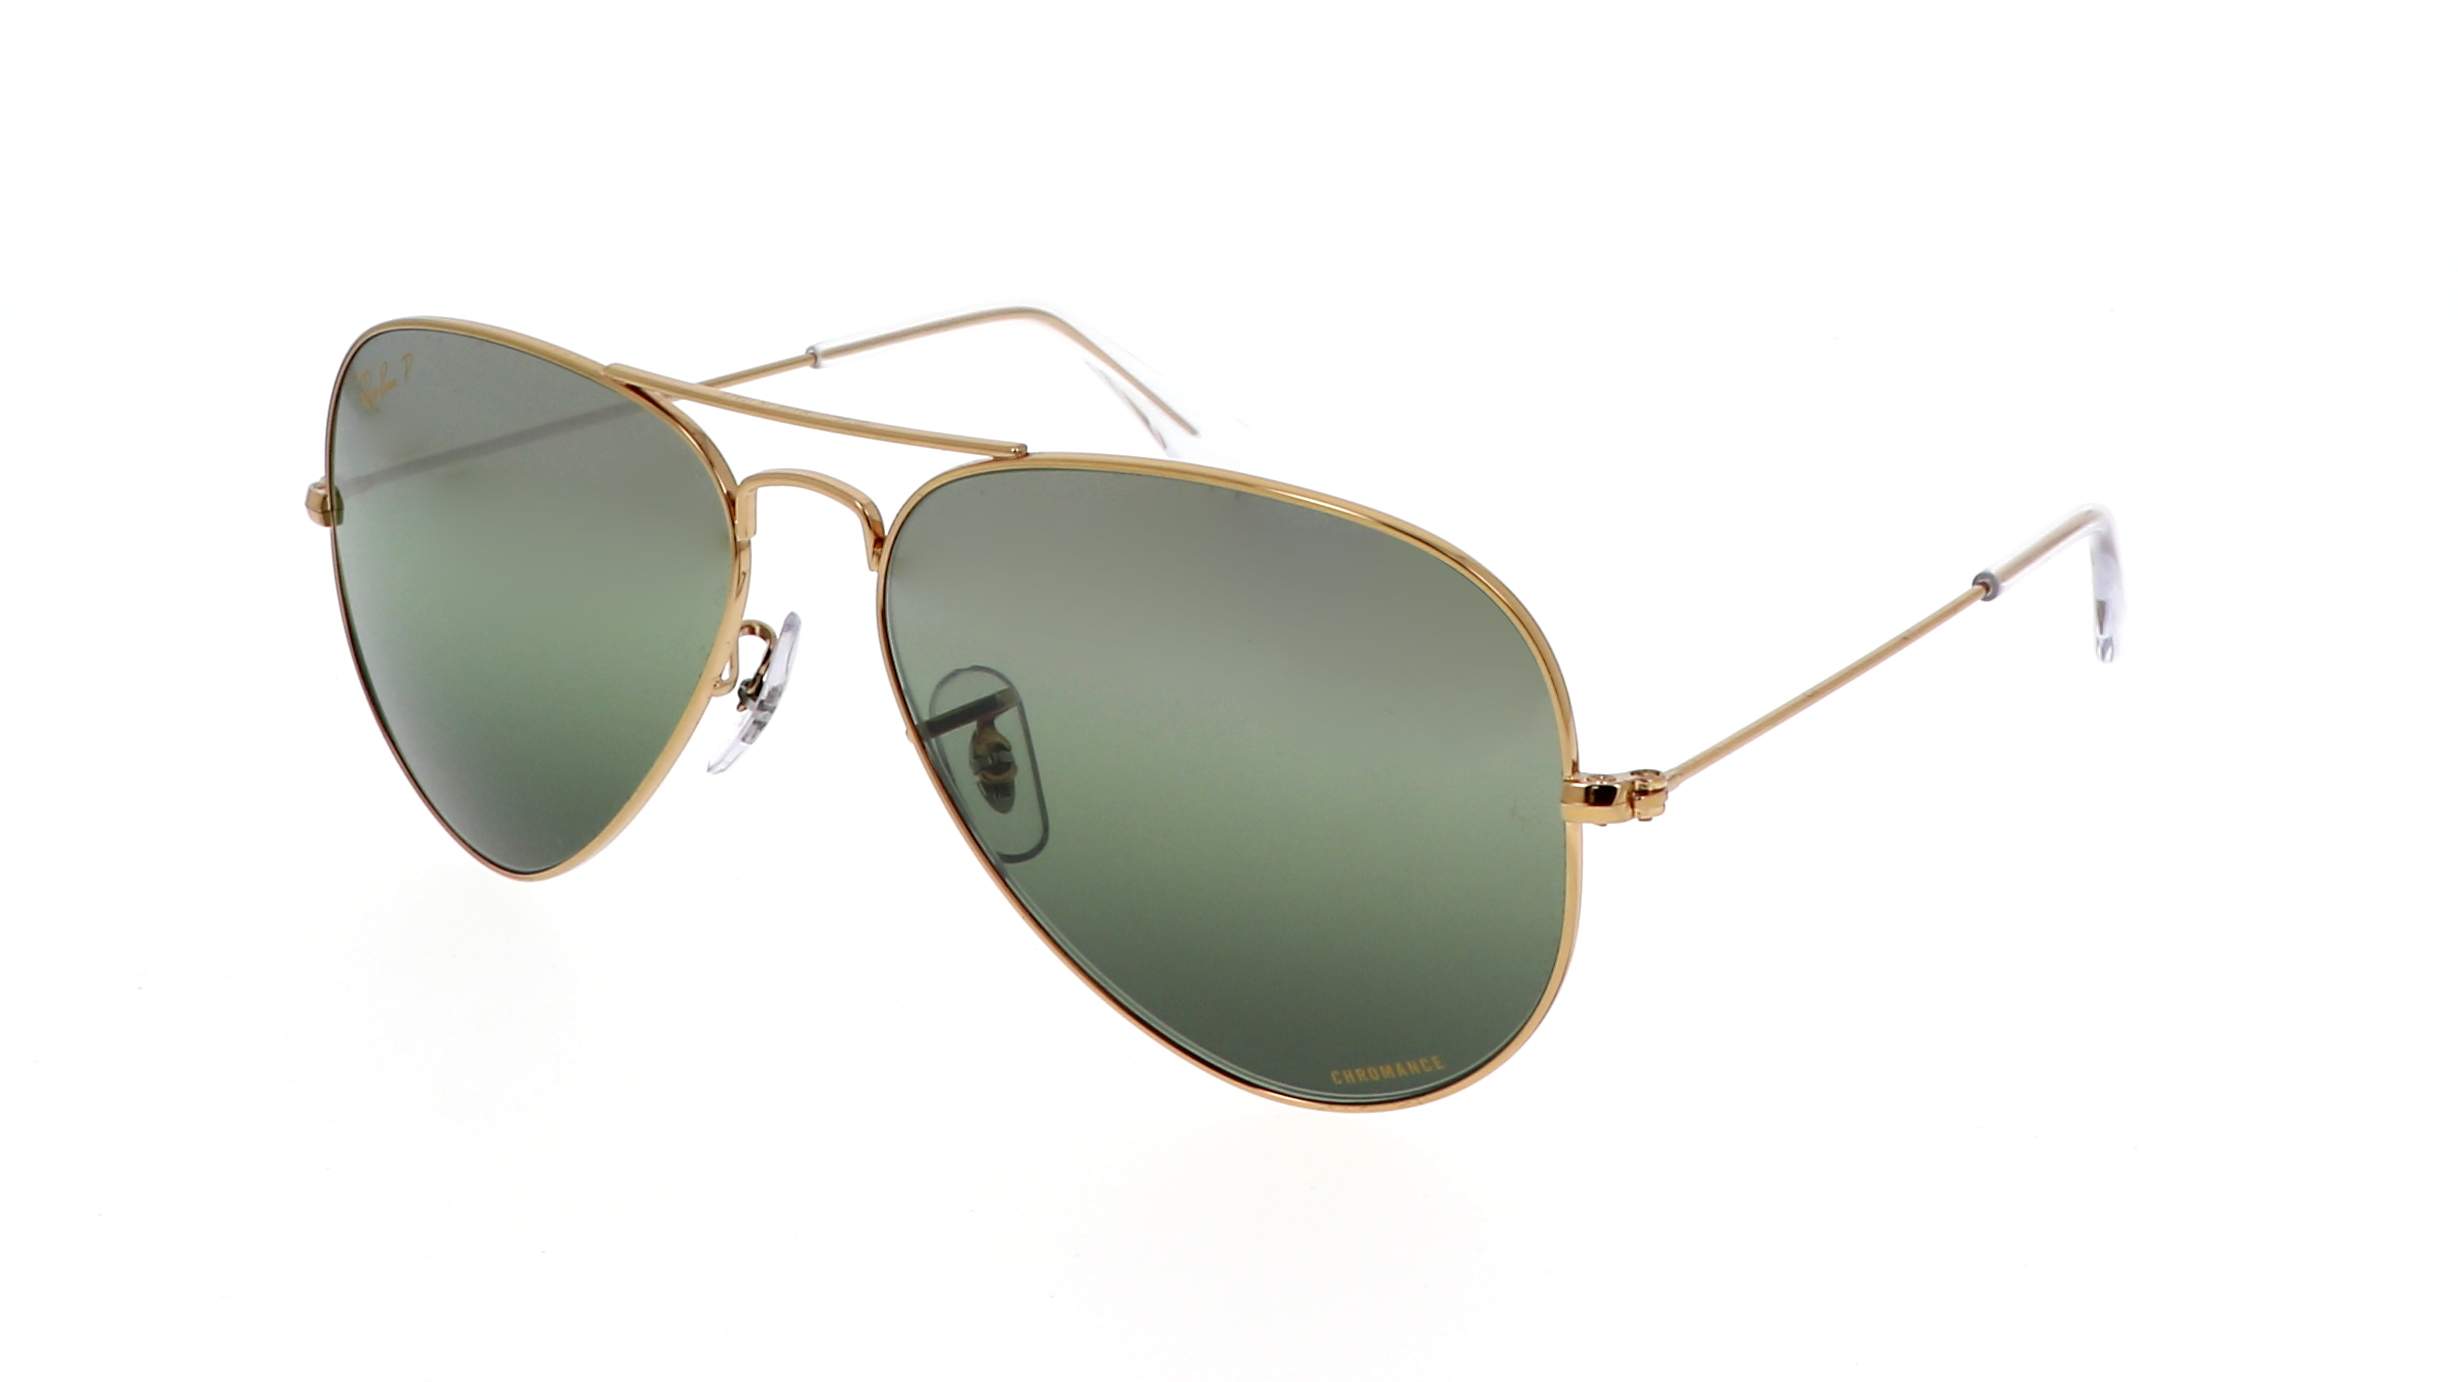 Sunglasses Ray-ban Aviator Legend Gold RB3025 9196/G4 58-14 in stock ...